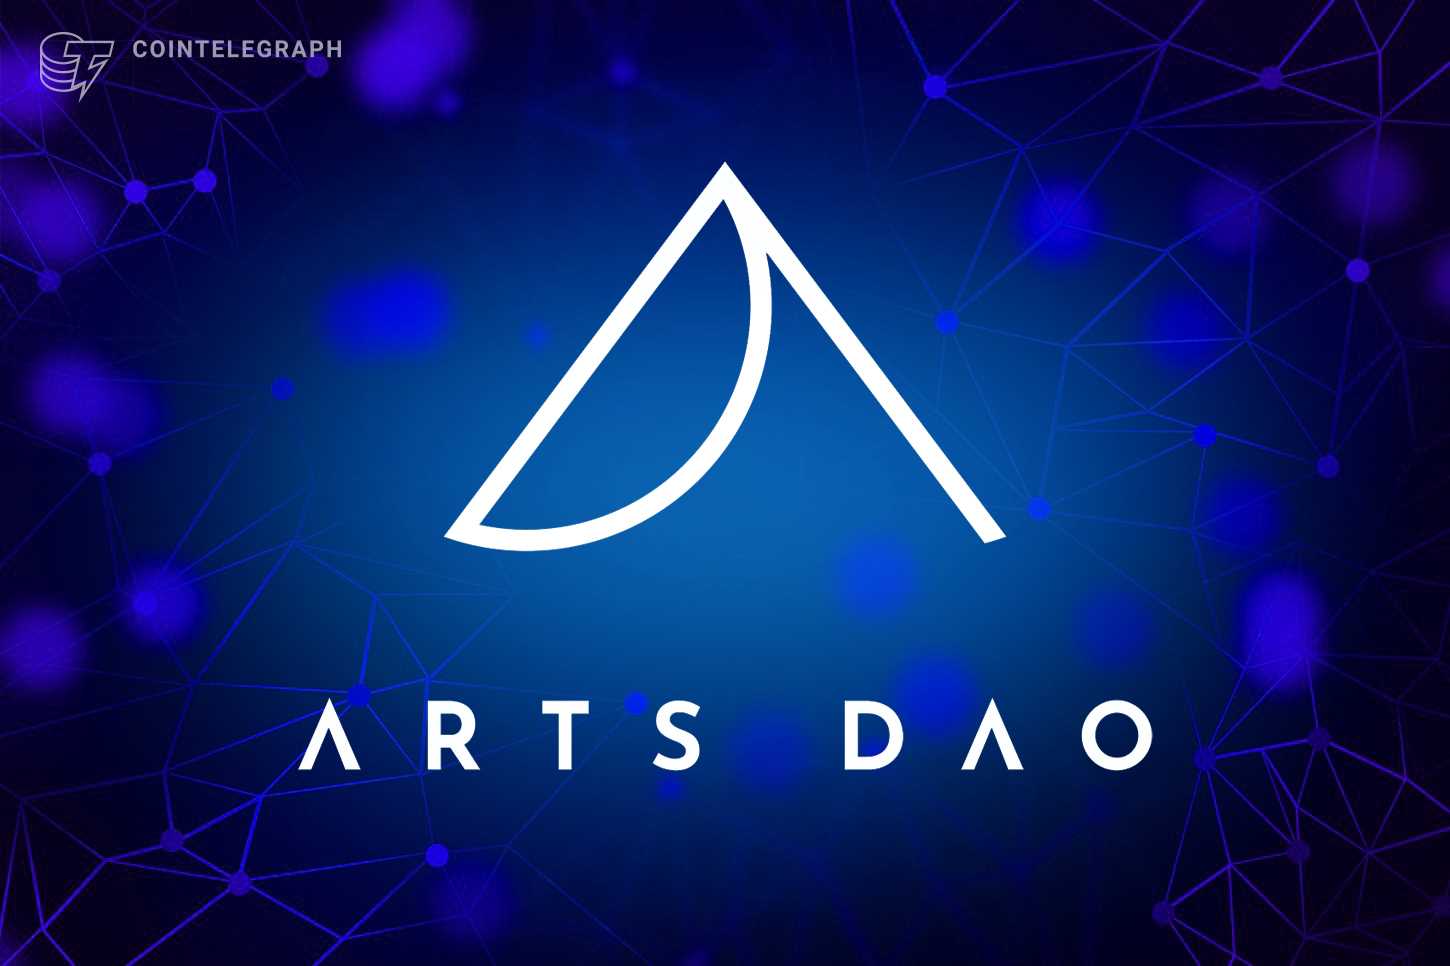 Culture-rich Arts DAO Fest to launch in Dubai this spring